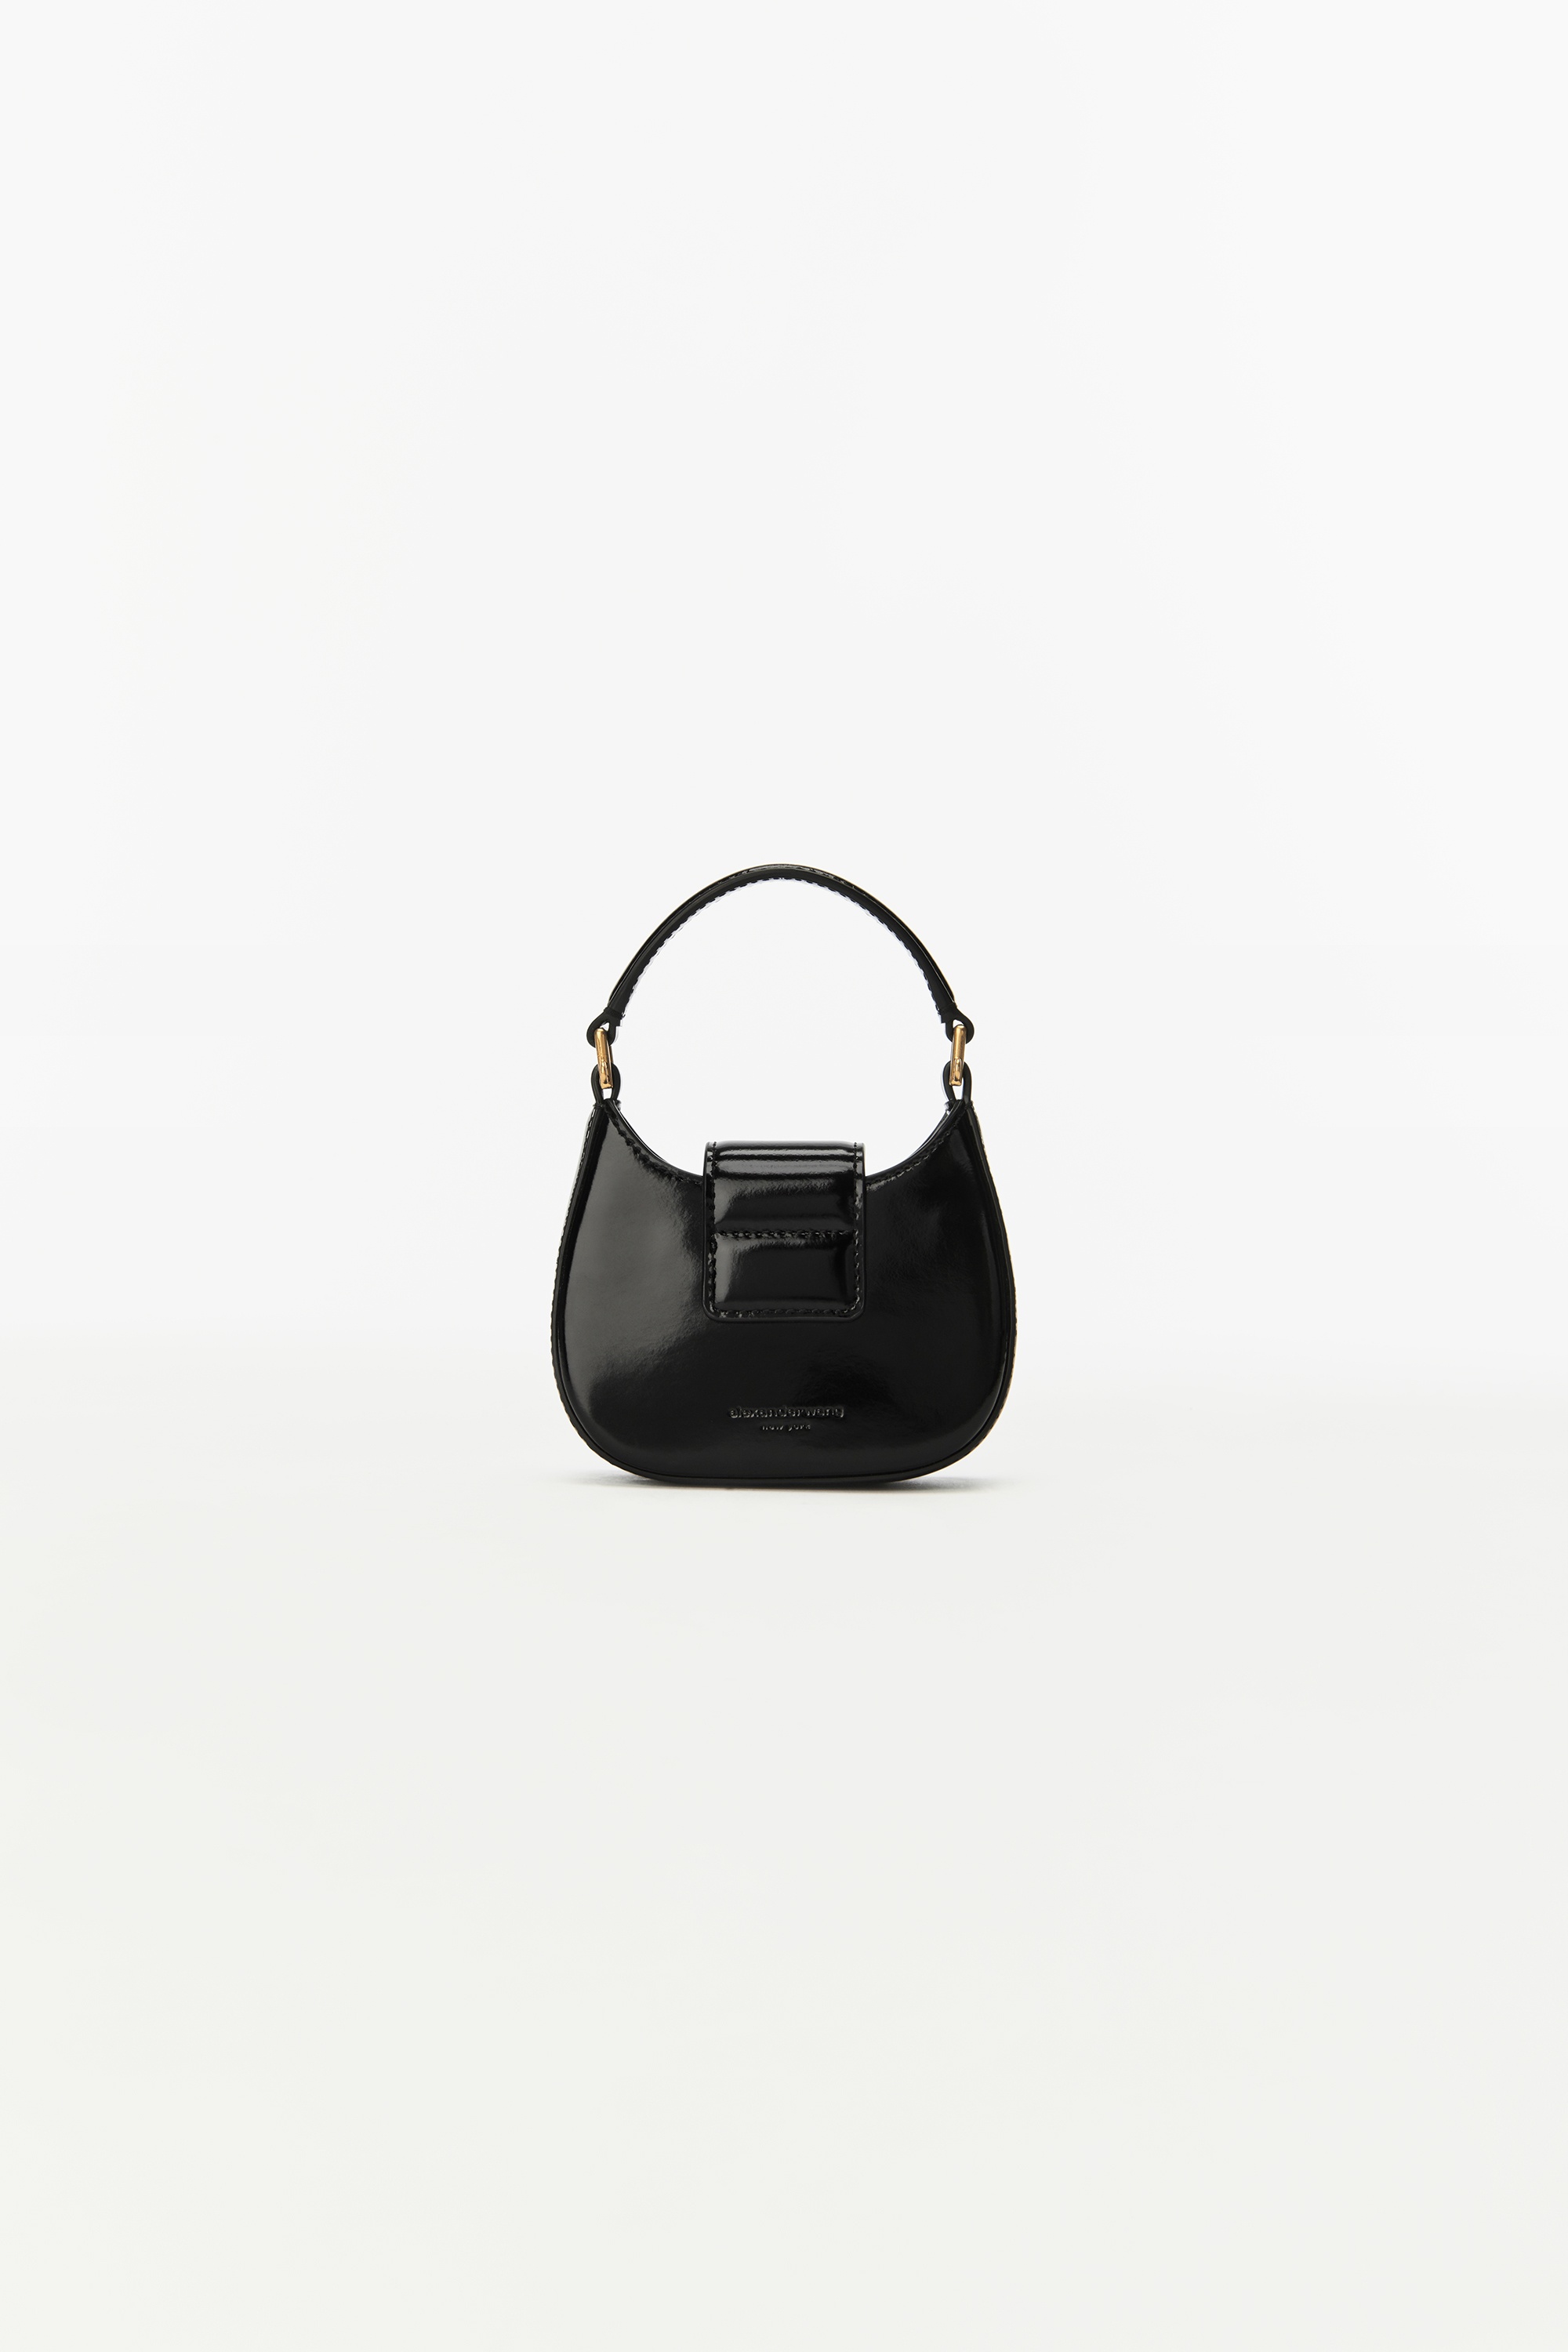 W LEGACY MICRO HOBO IN LEATHER - 6